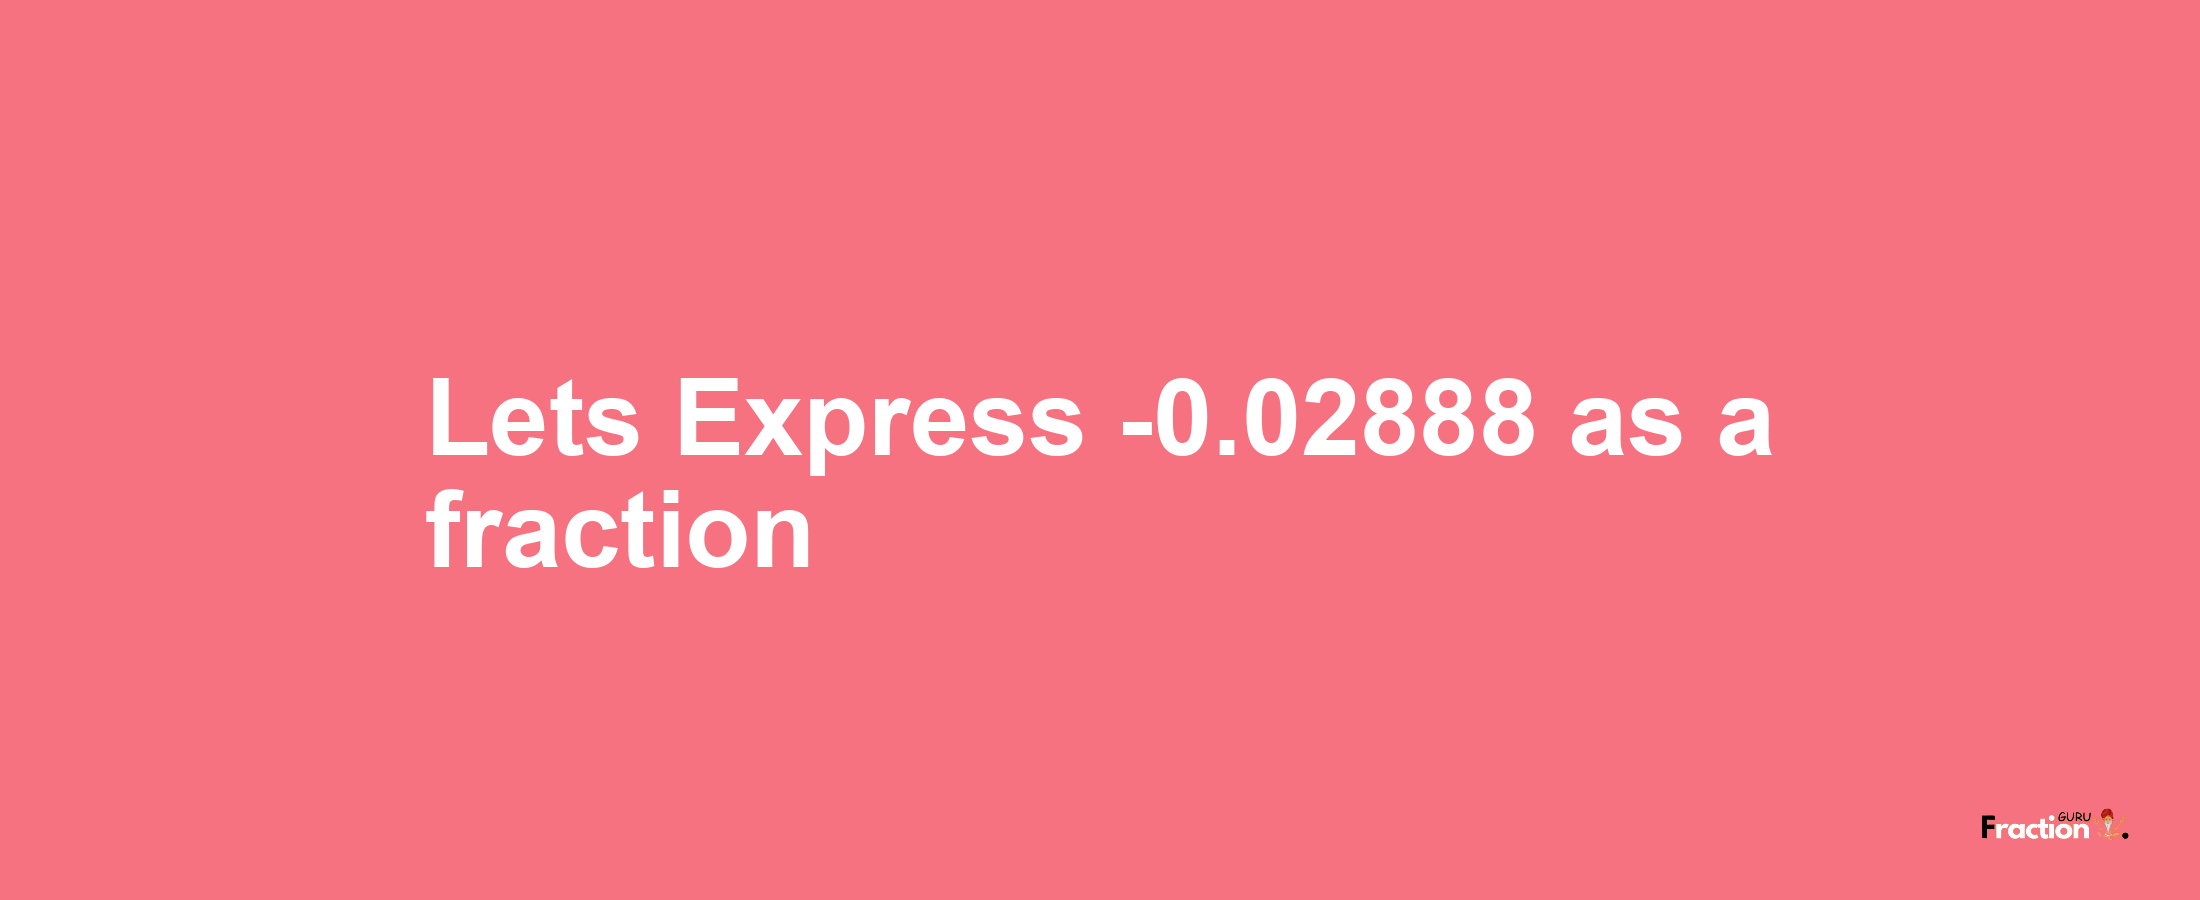 Lets Express -0.02888 as afraction